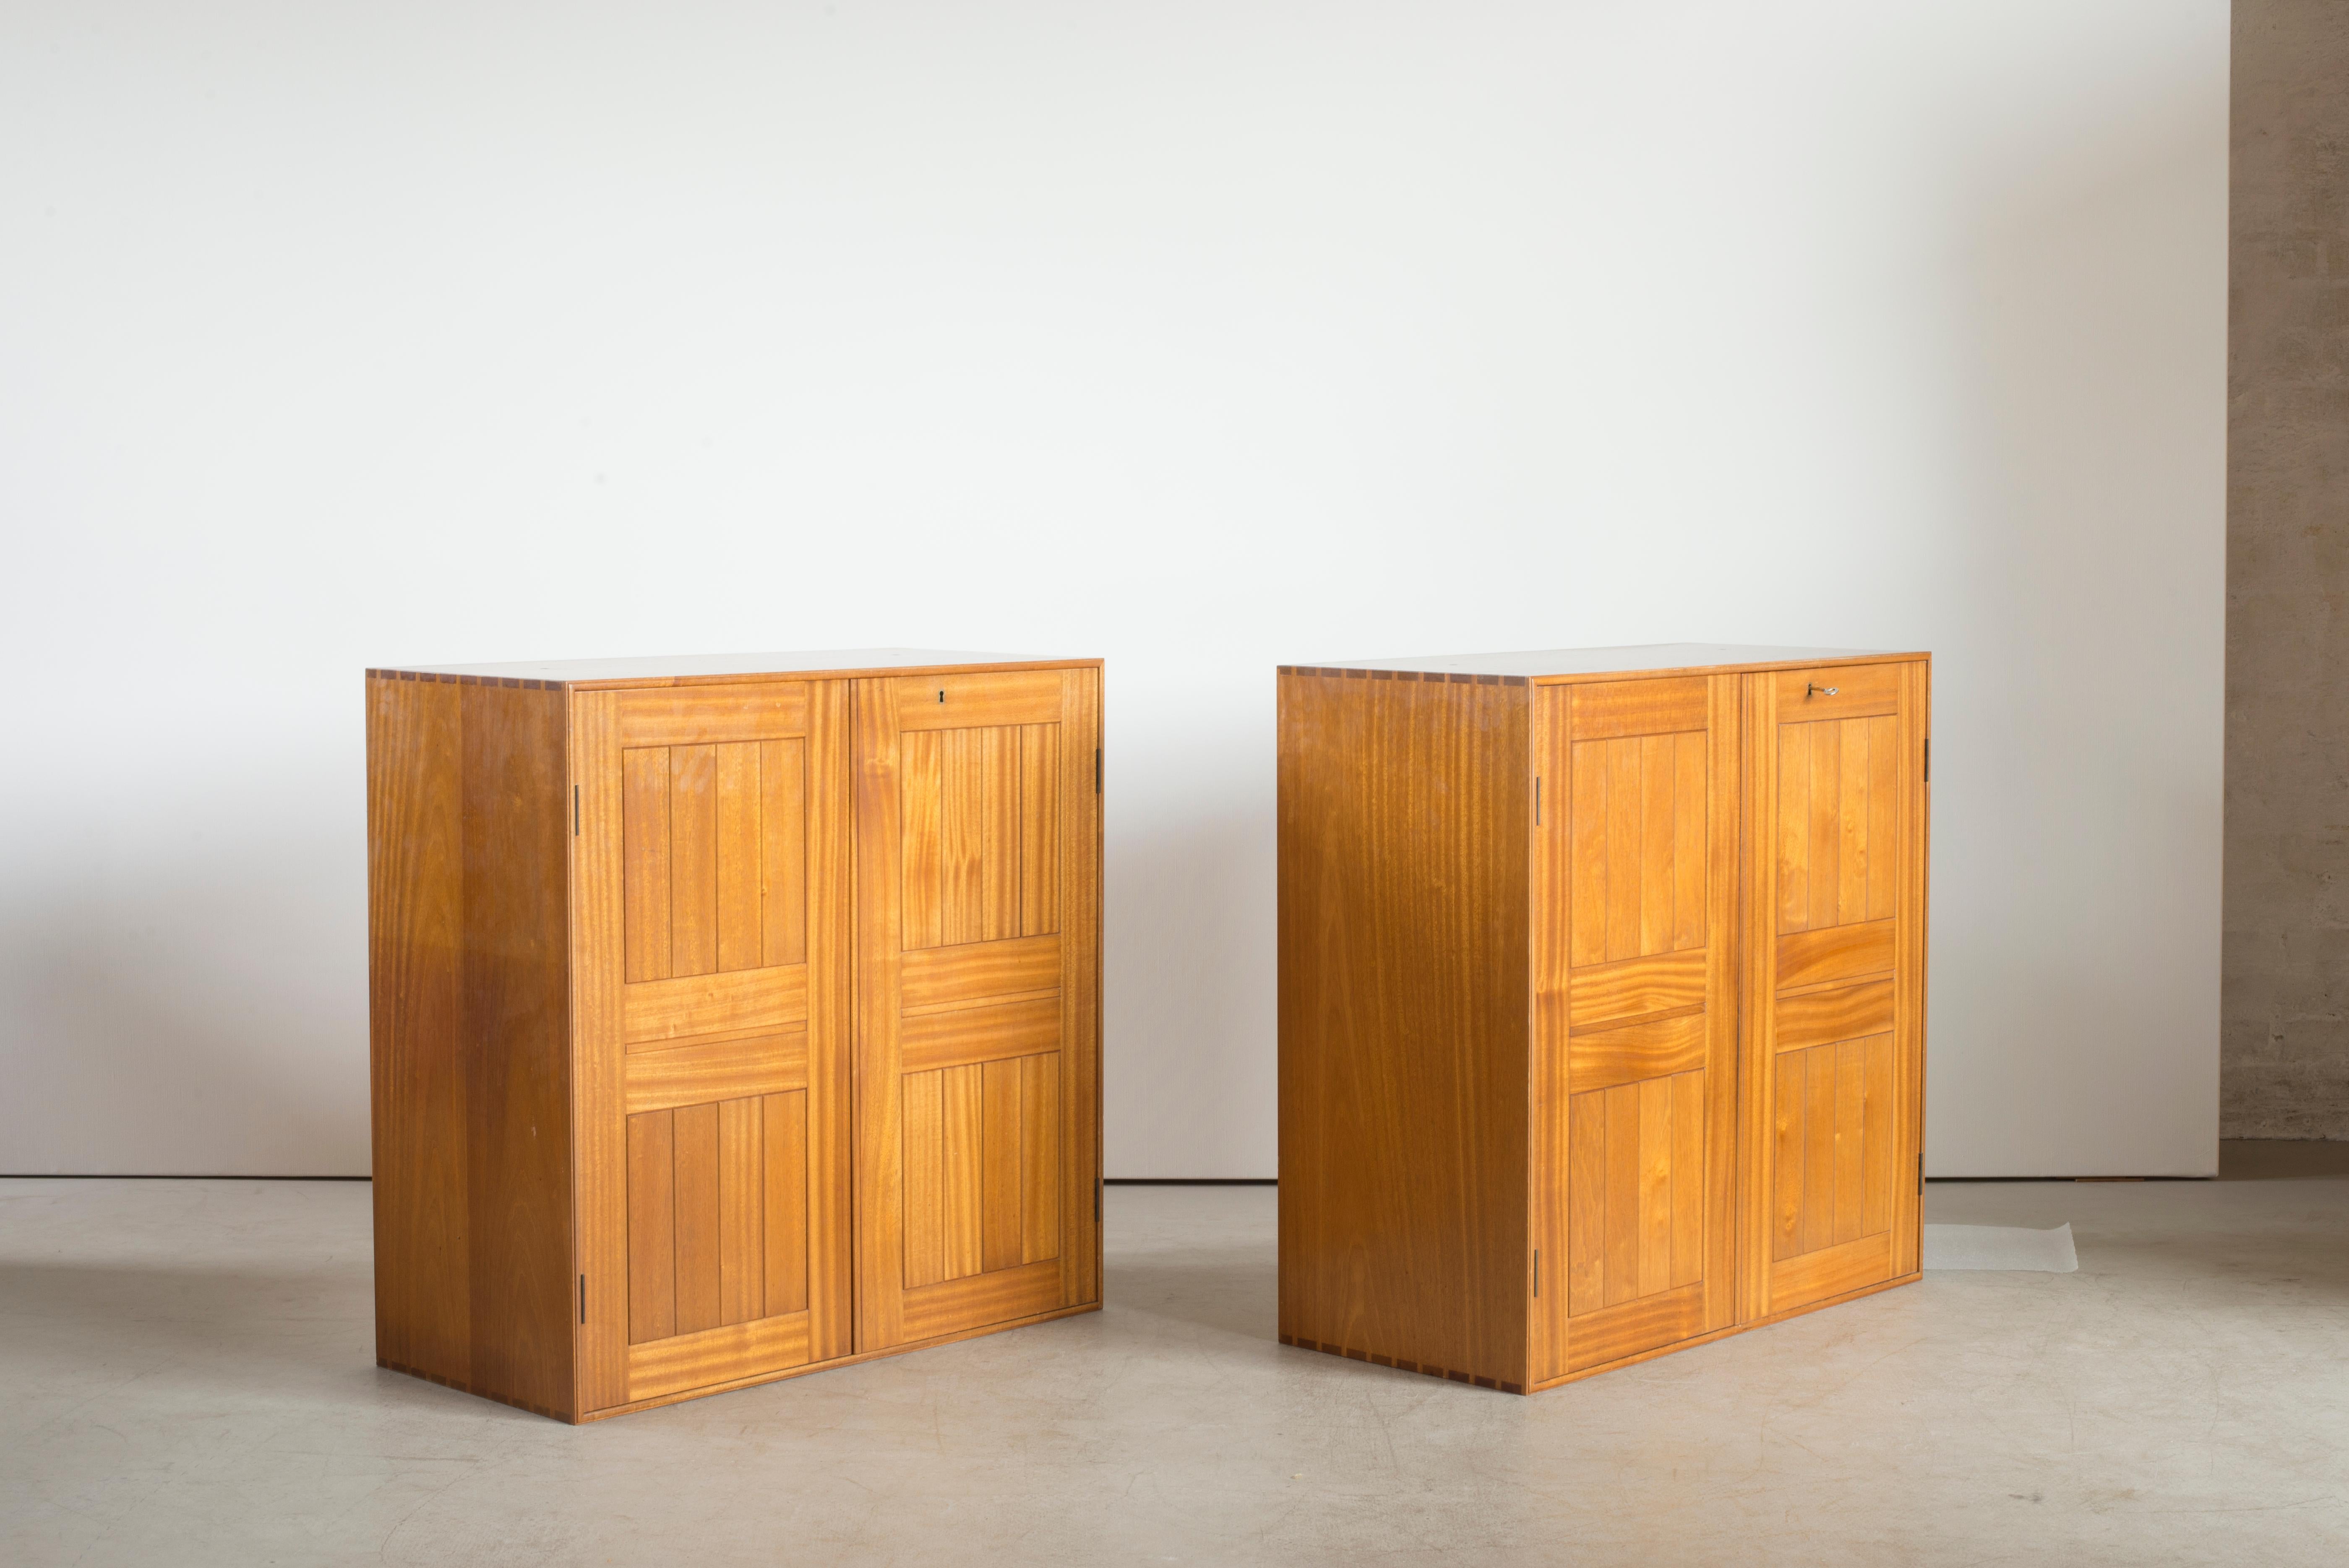 Mogens Koch pair of wall-mounted cabinets in mahogany. Executed by Rud. Rasmussen.

Reverse with manufacturer's paper label RUD. RASMUSSEN / SNEDKERIER / 45 NØRREBROGADE / KØBENHAVN.